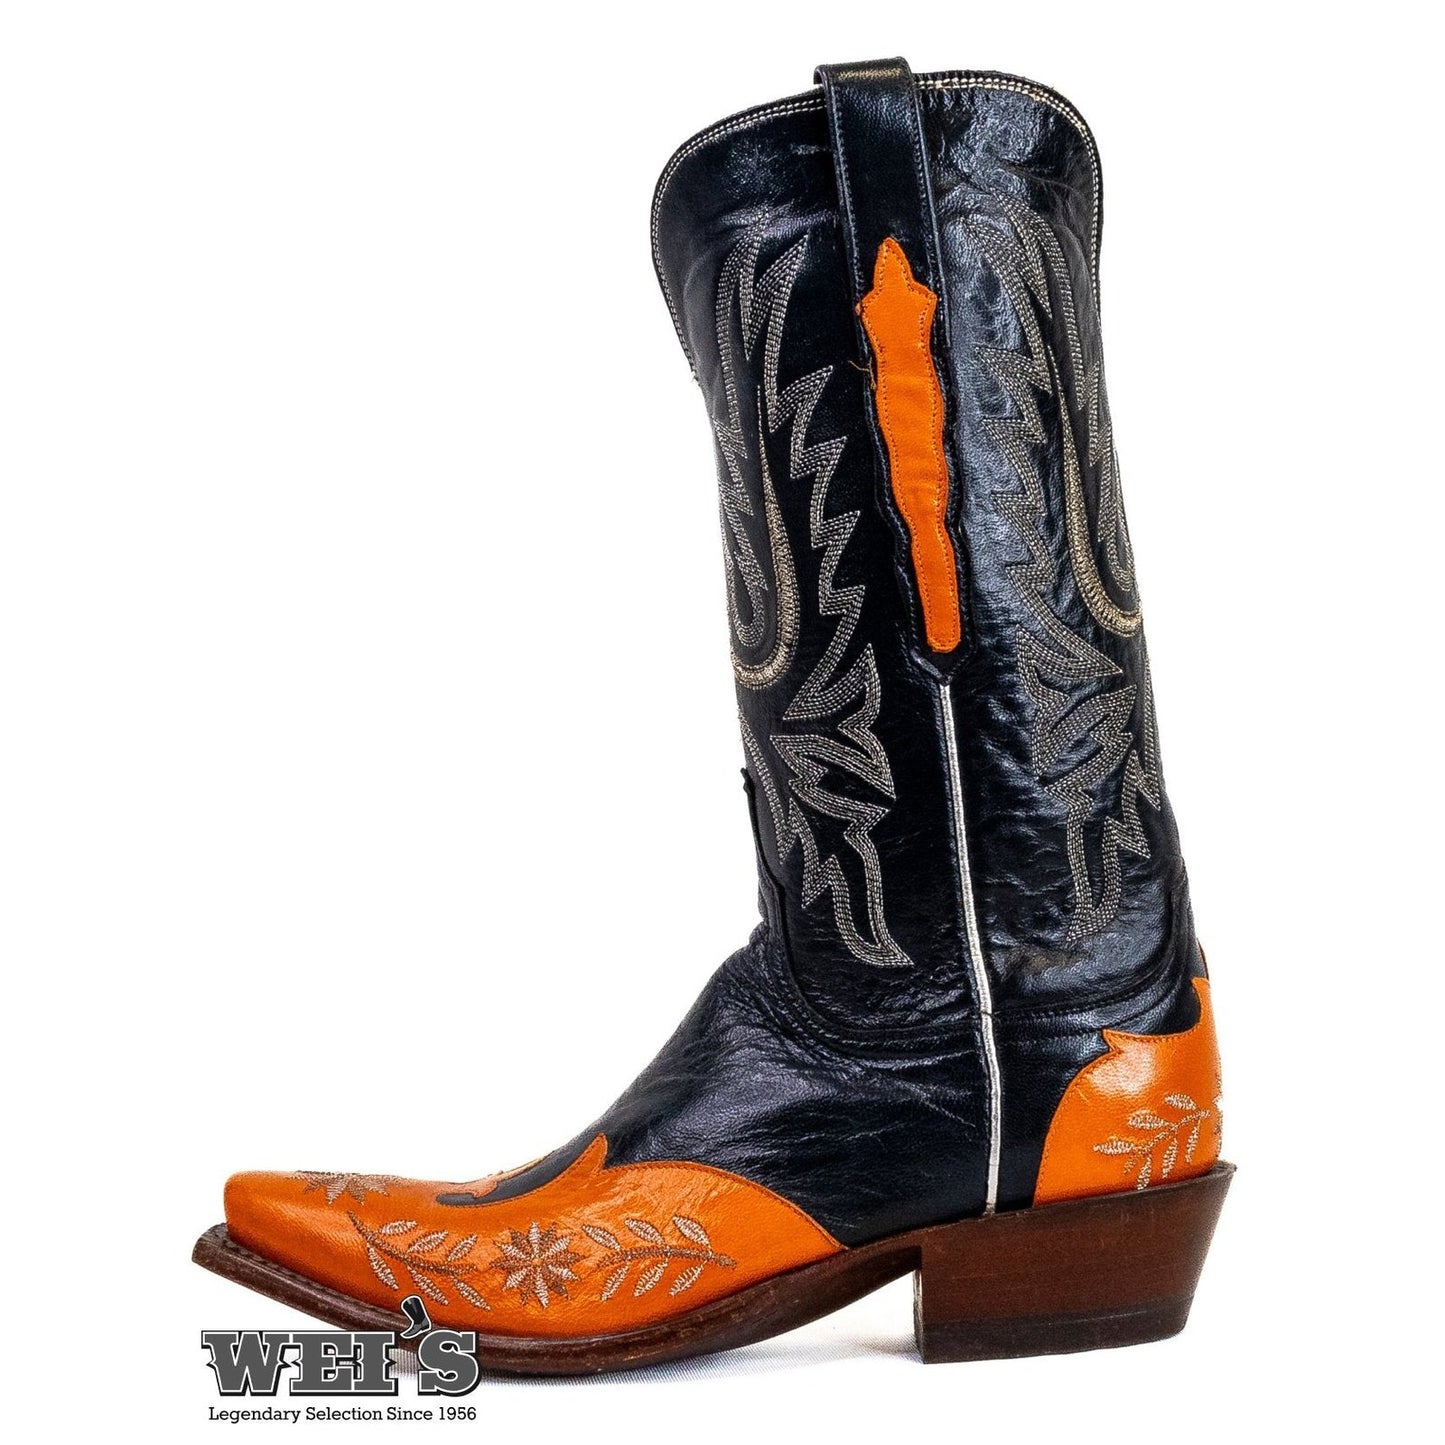 Lucchese Women's Diva Boots DV008 Clearance - Clearance